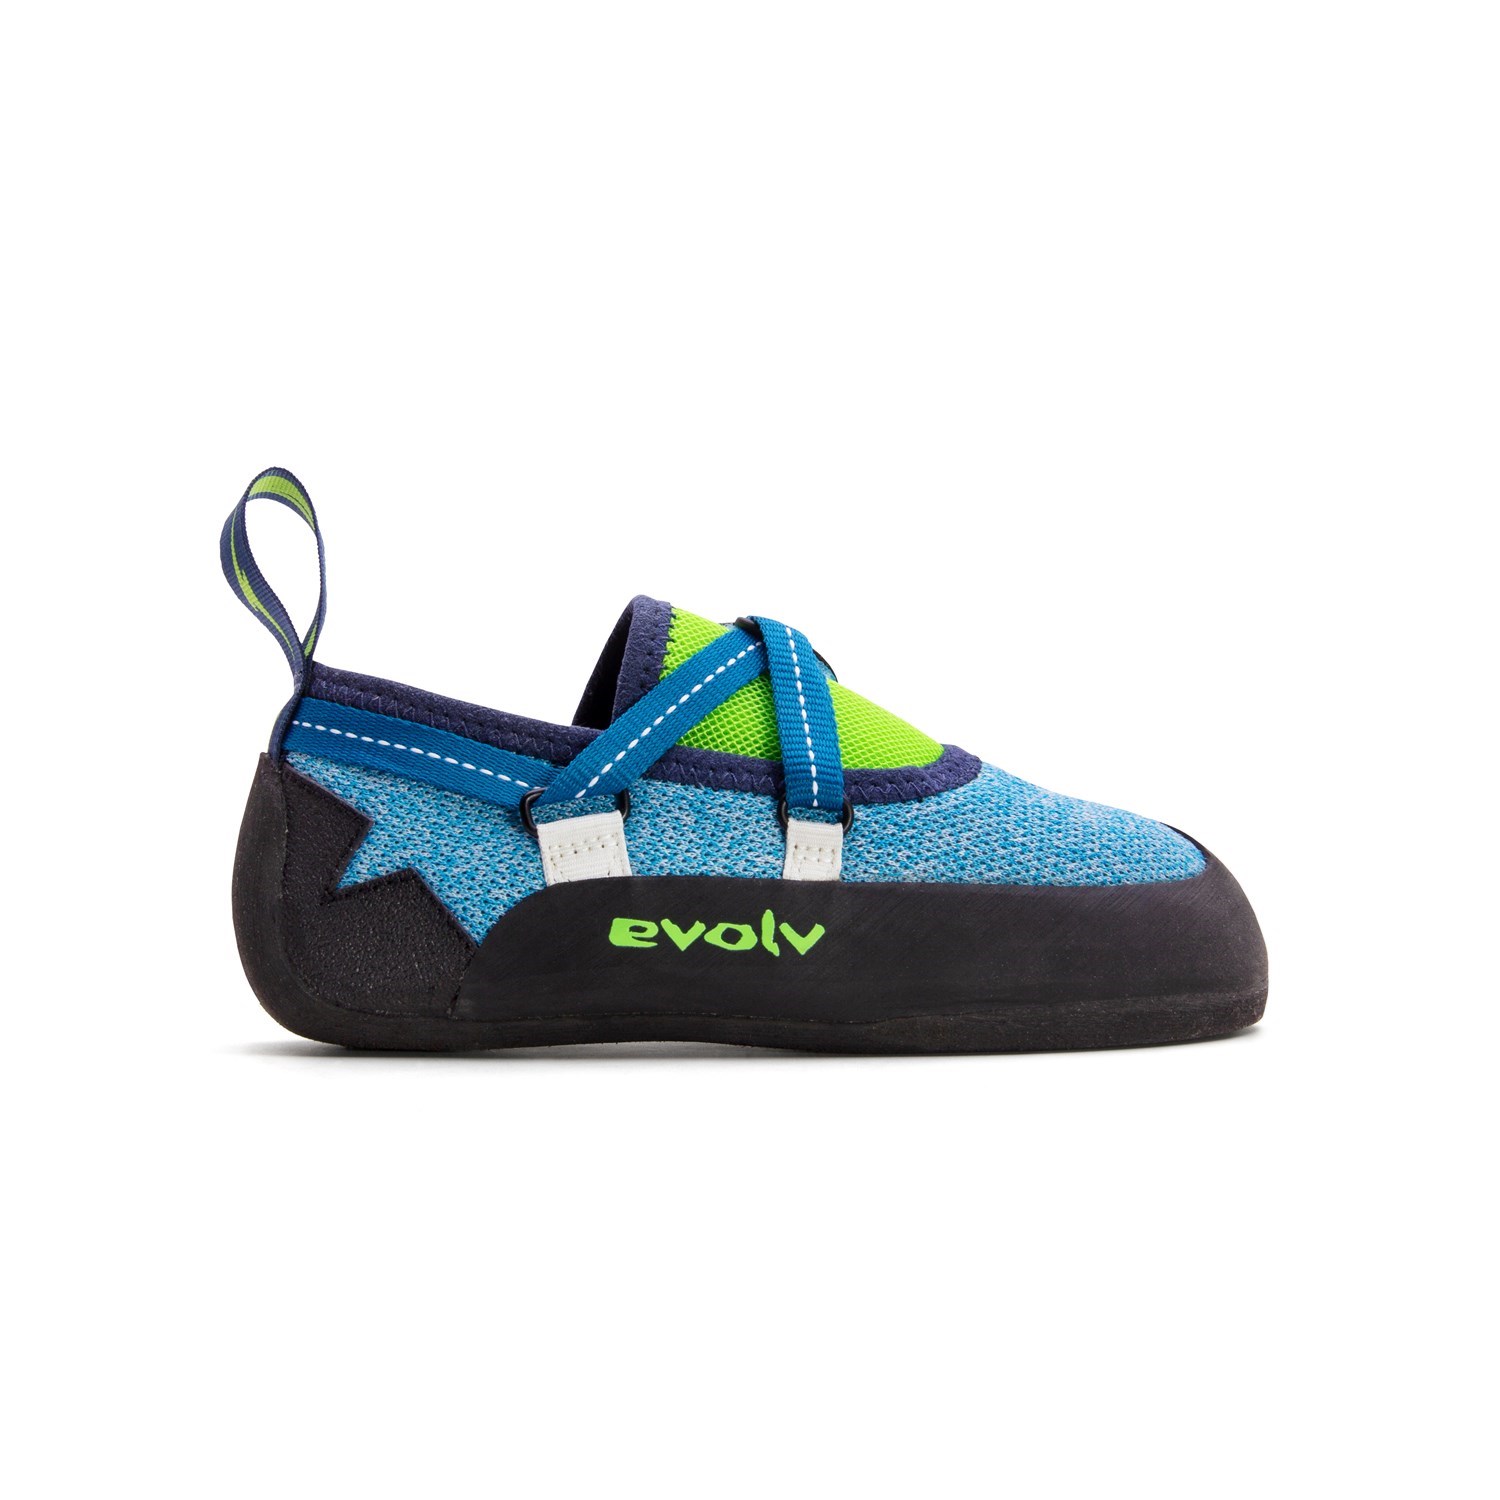 Introduction to Kids Climbing Shoes